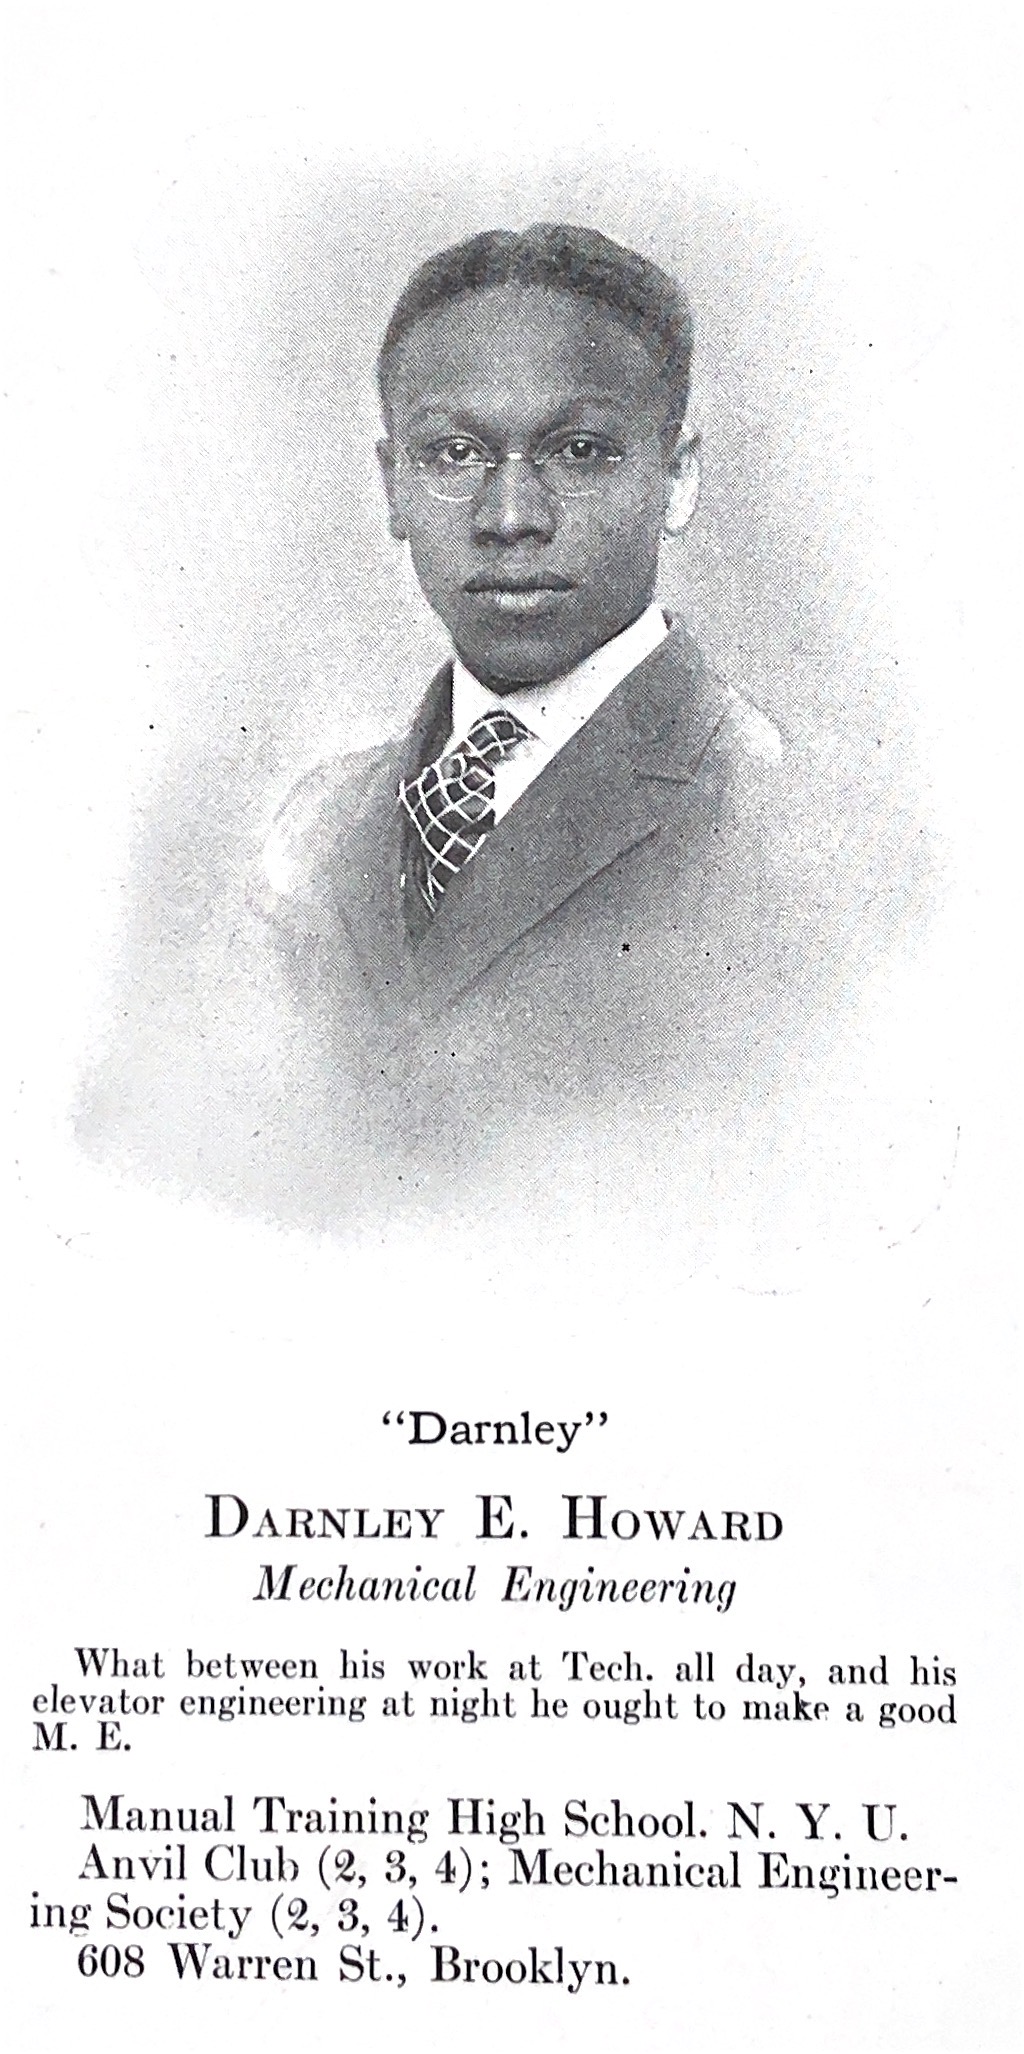 Darnley E. Howard Yearbook Picture. From Polywog 1920